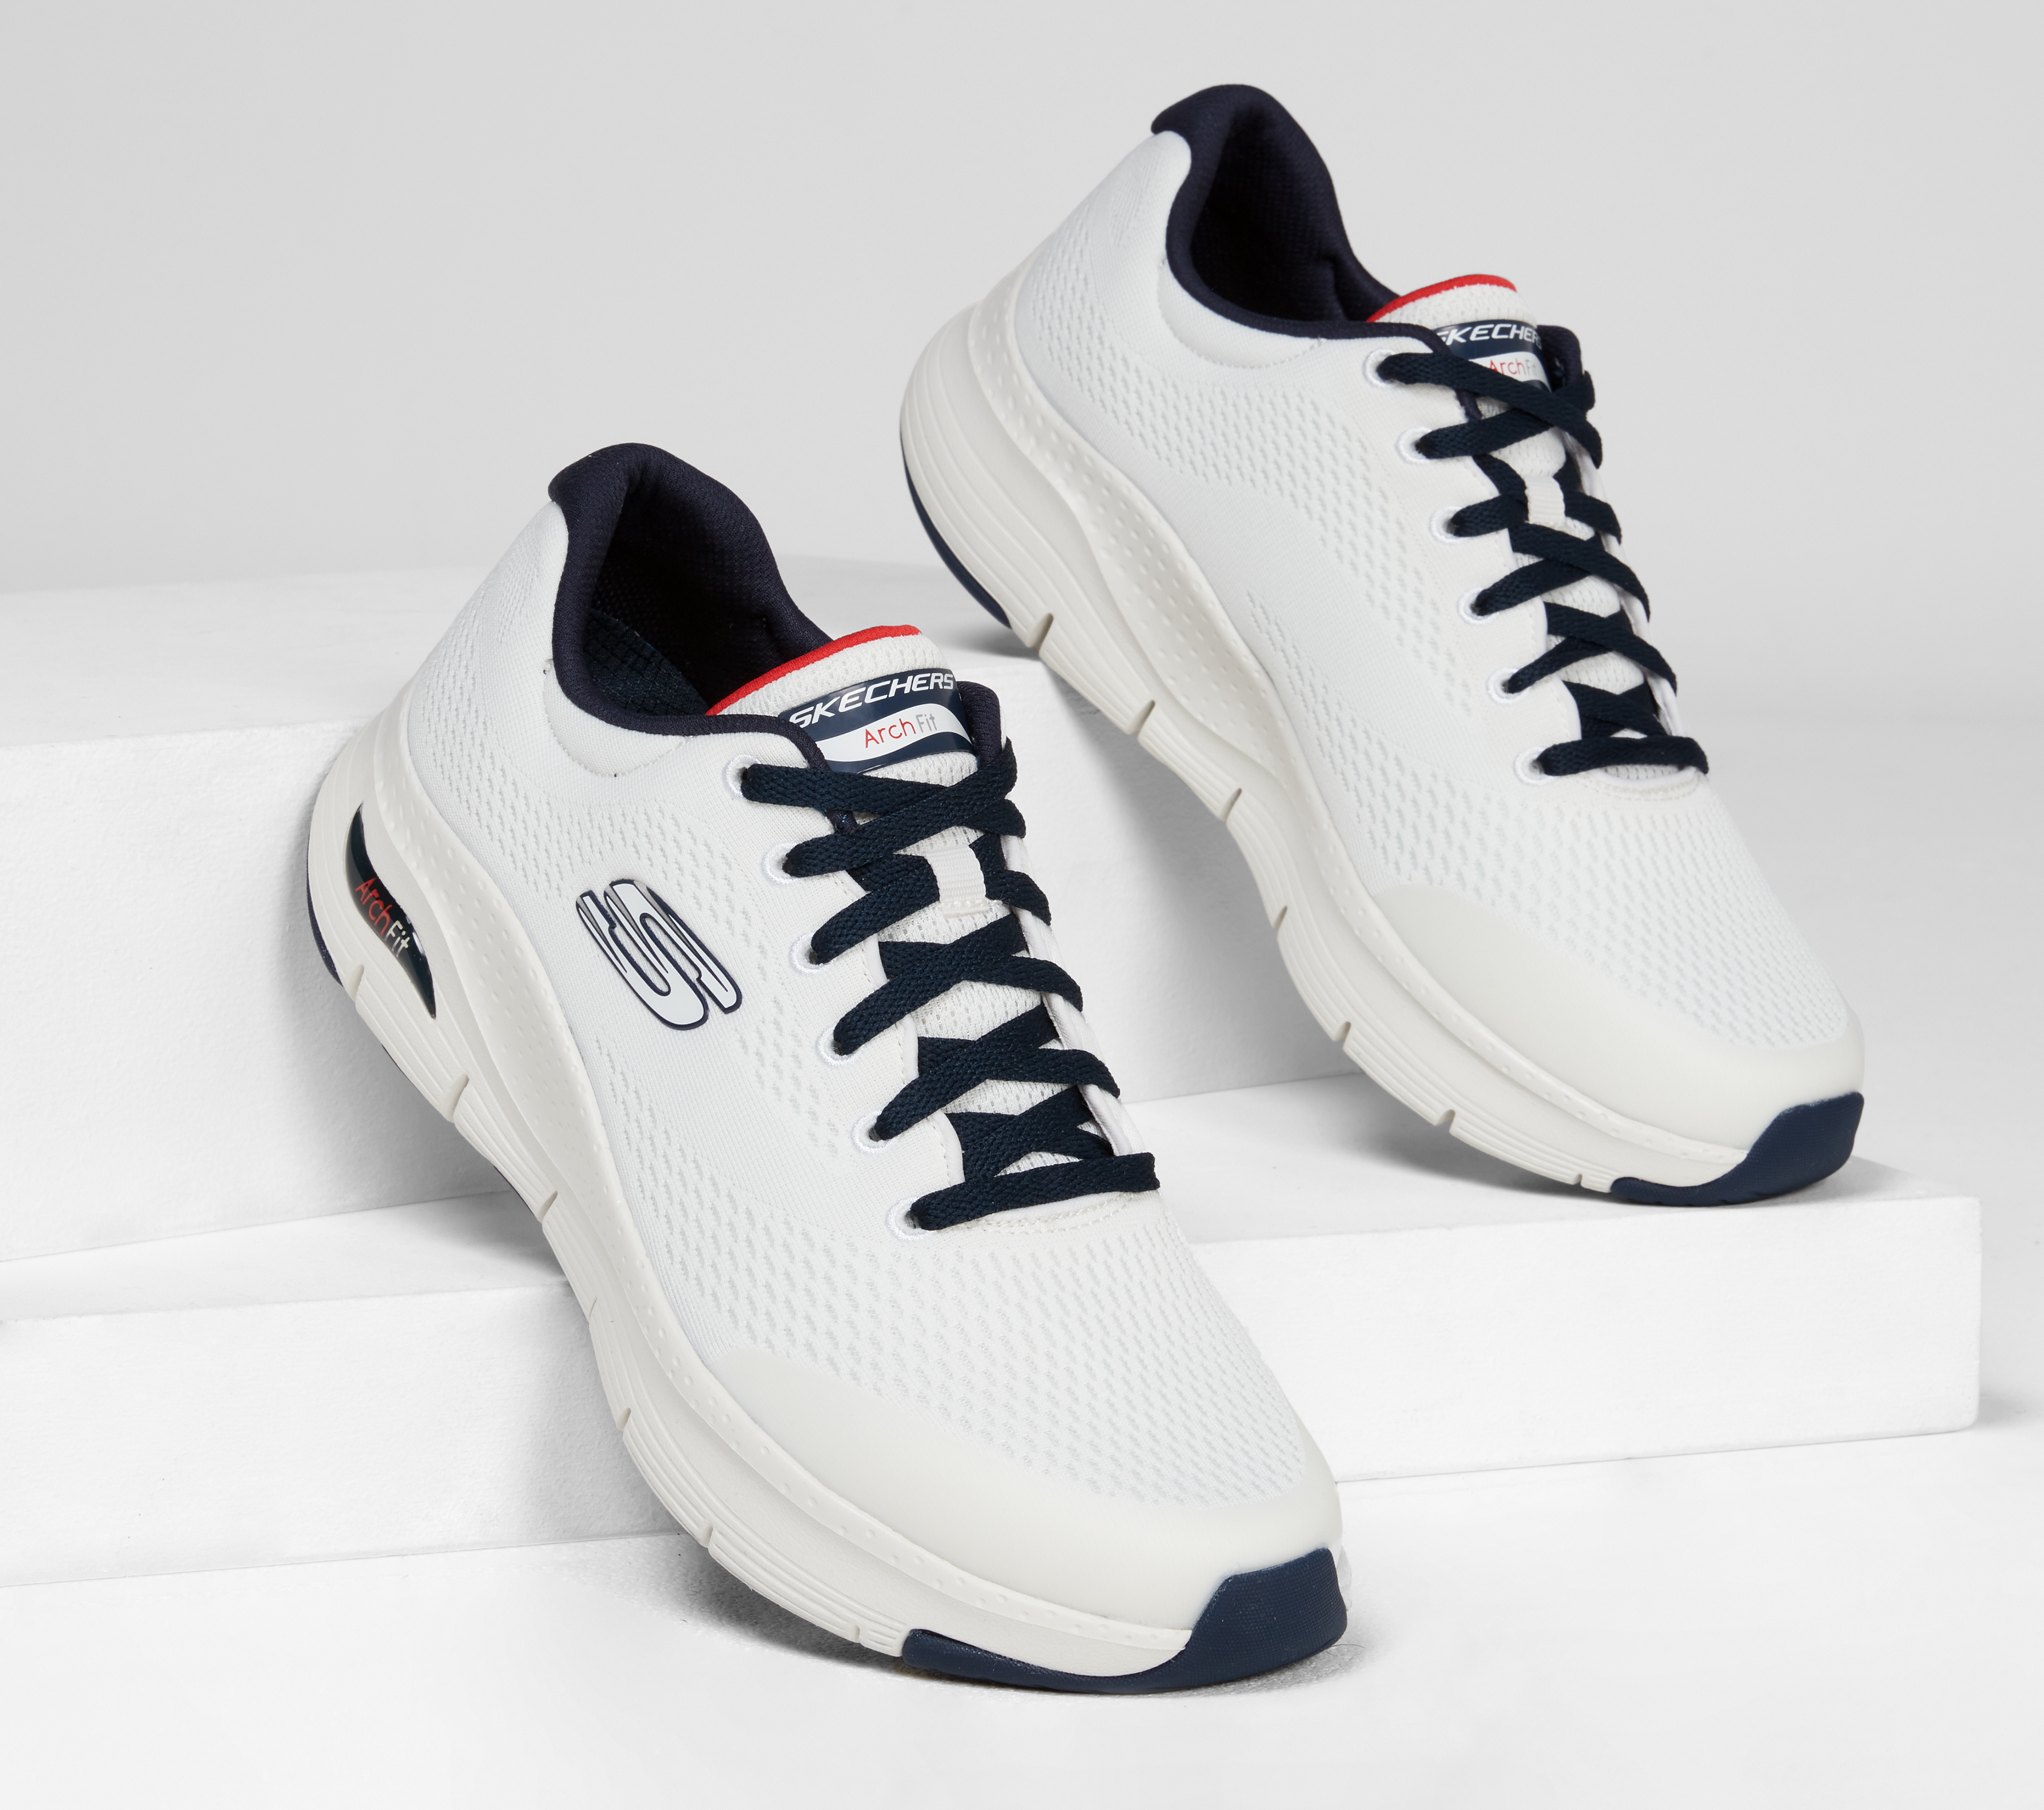 who sells skechers tennis shoes